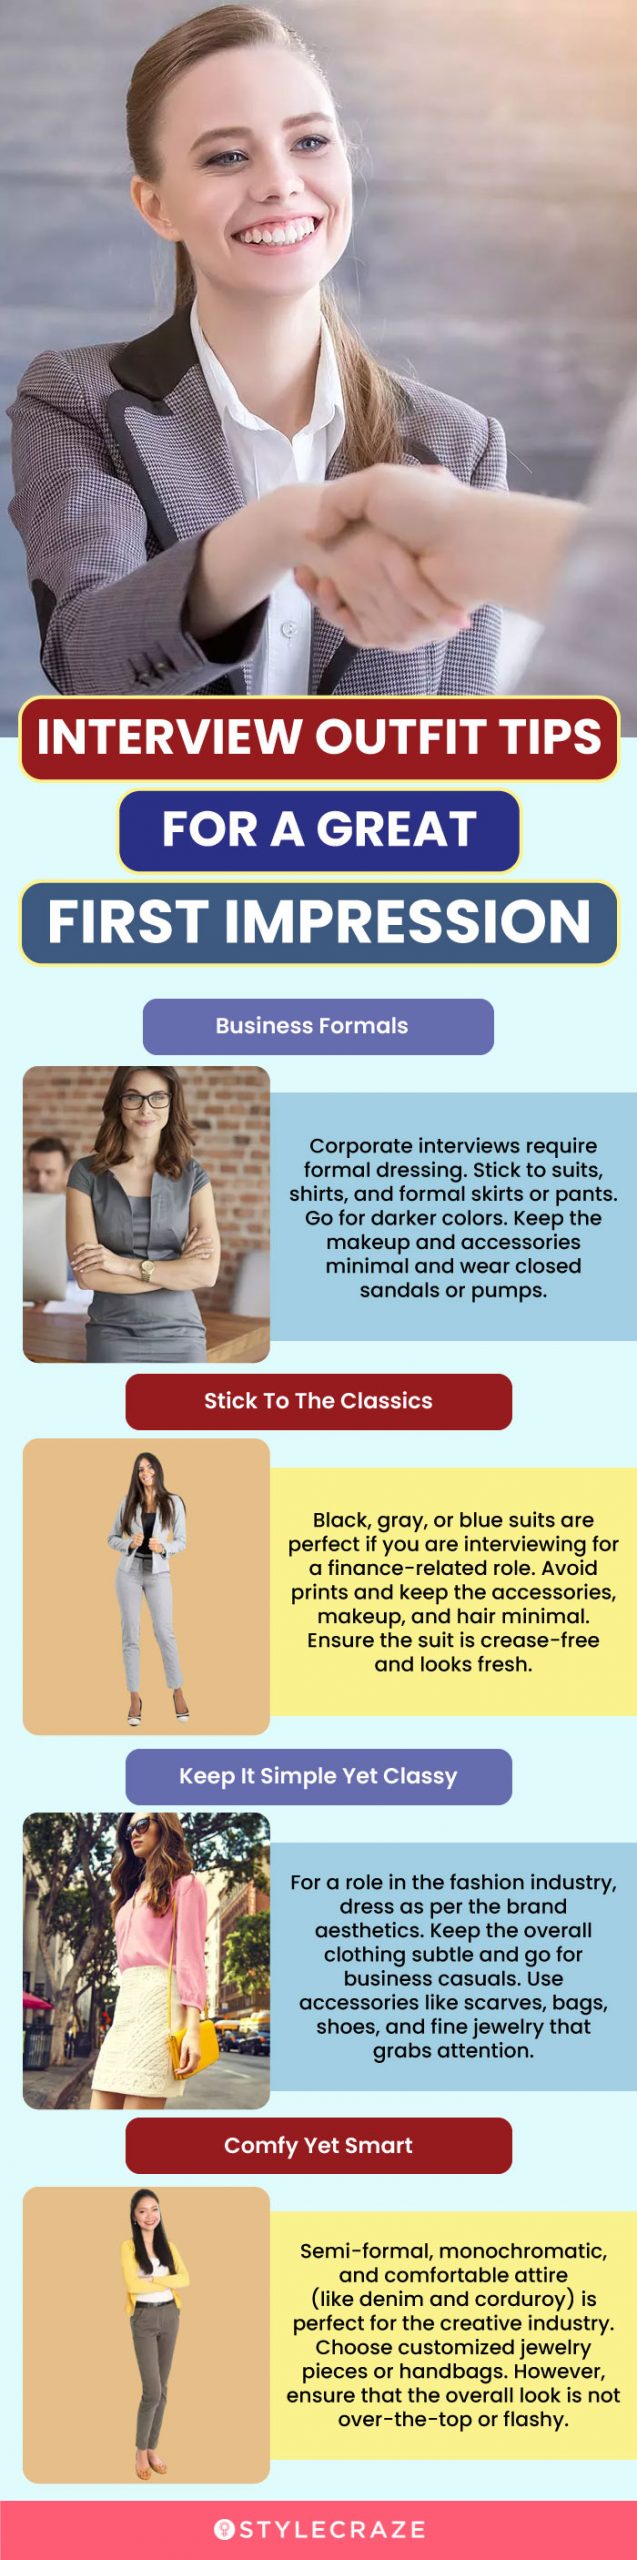 interview outfit tips for a great first impression (infographic)